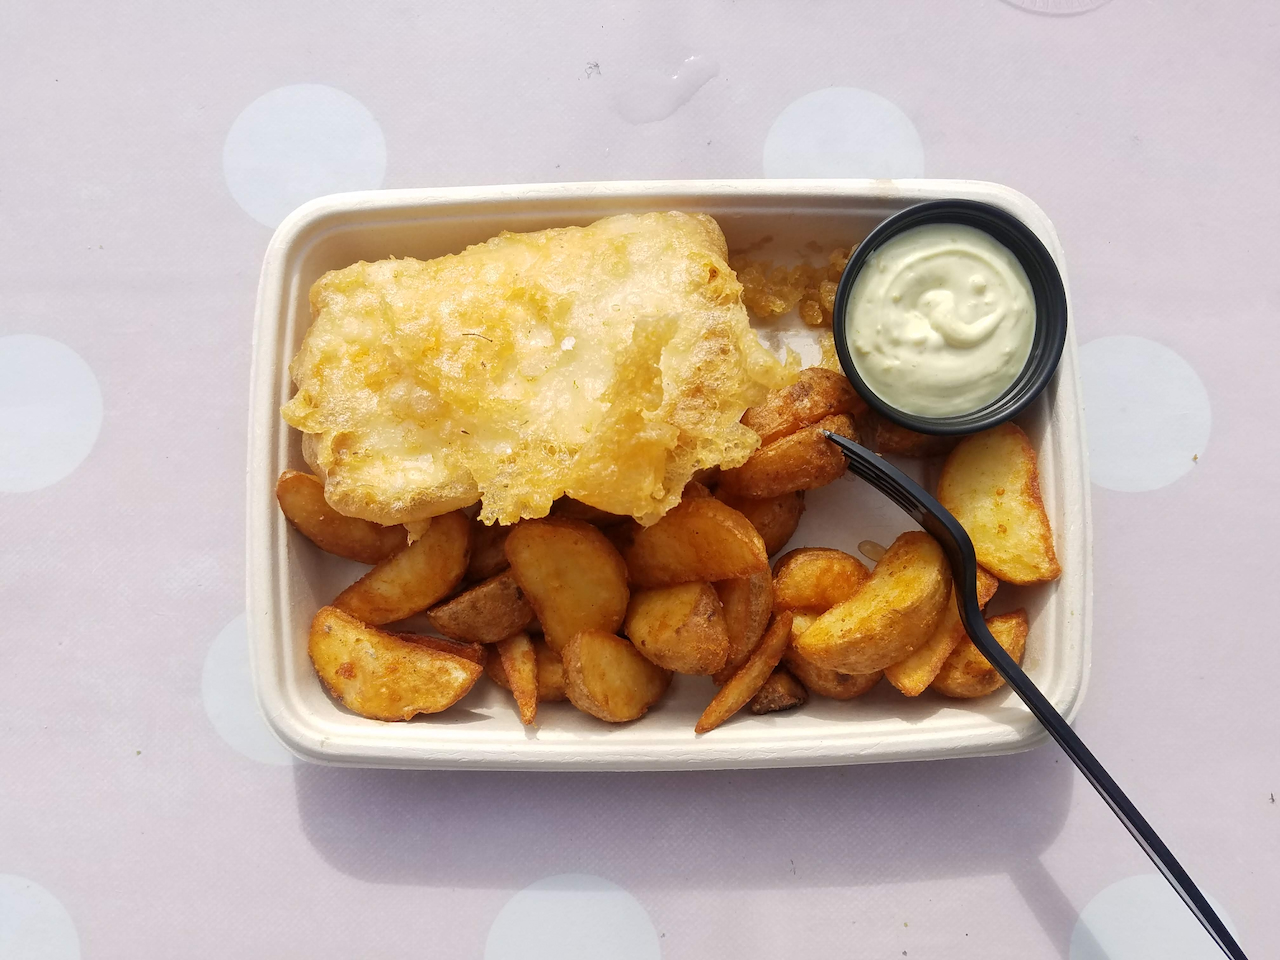 Mia's fish and chips